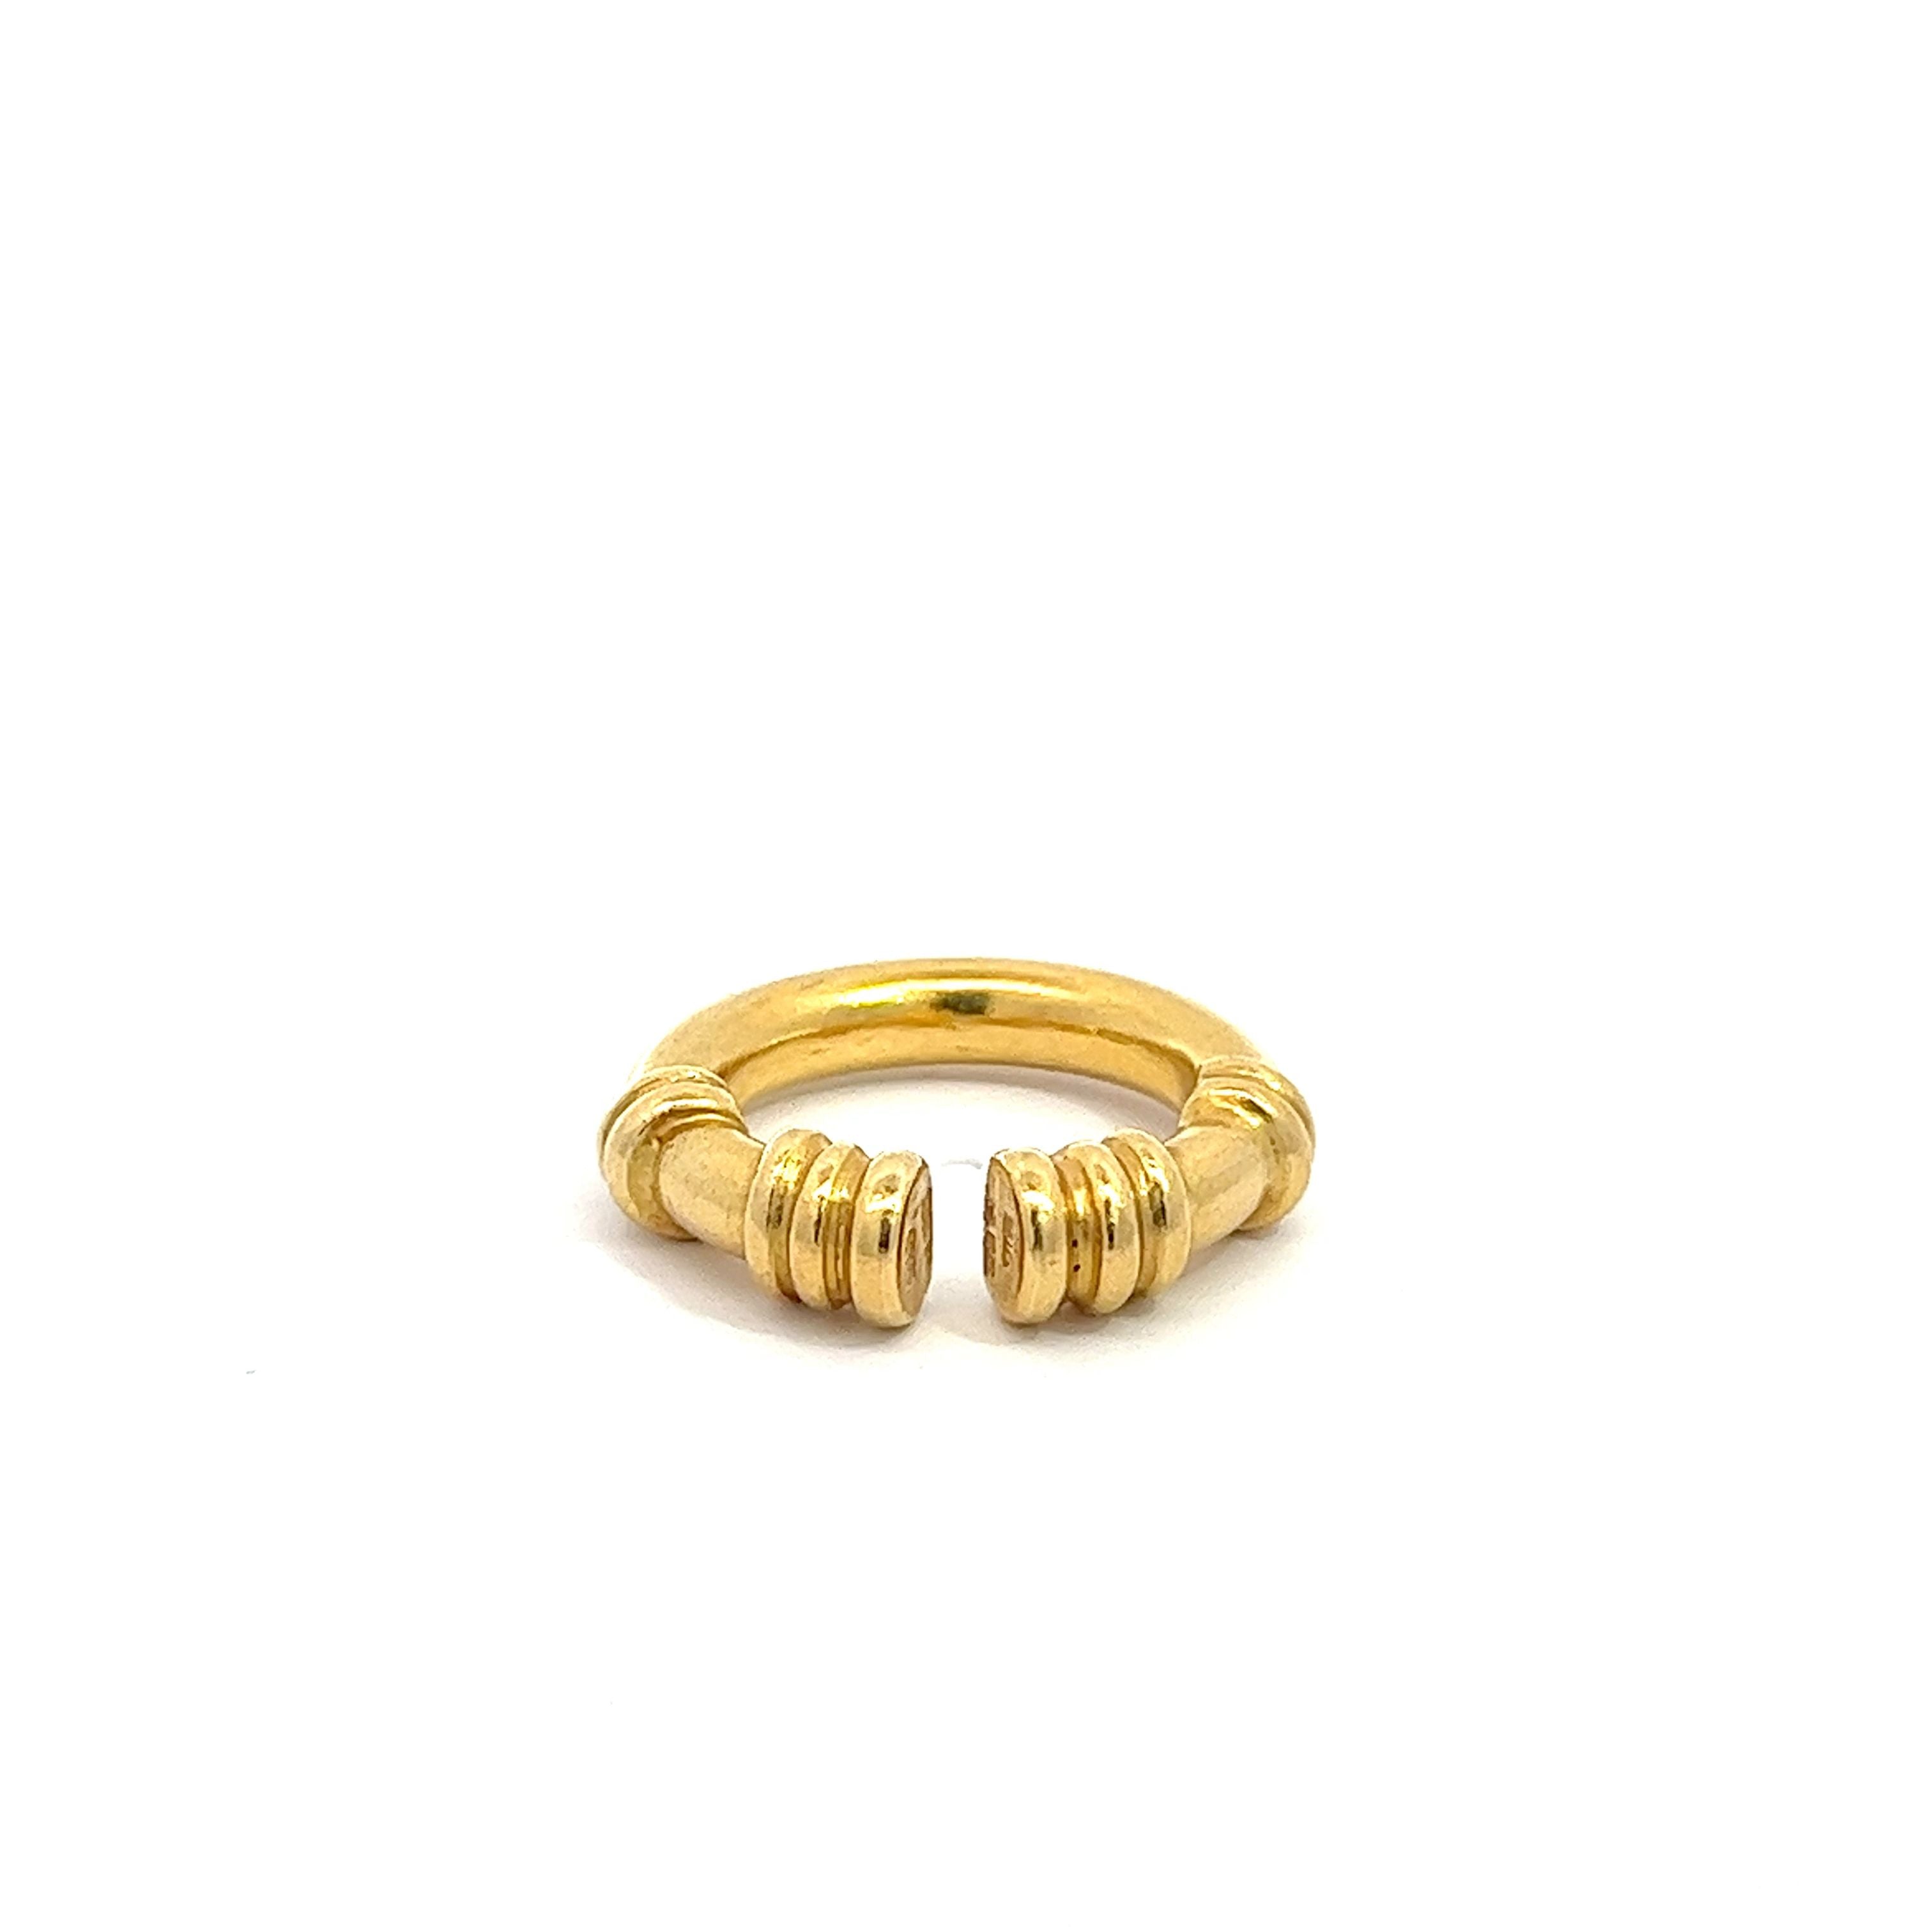 22k-Solid-Yellow-Gold-Textured-Open-Gap-Unclosed-Ring-Rings.jpg